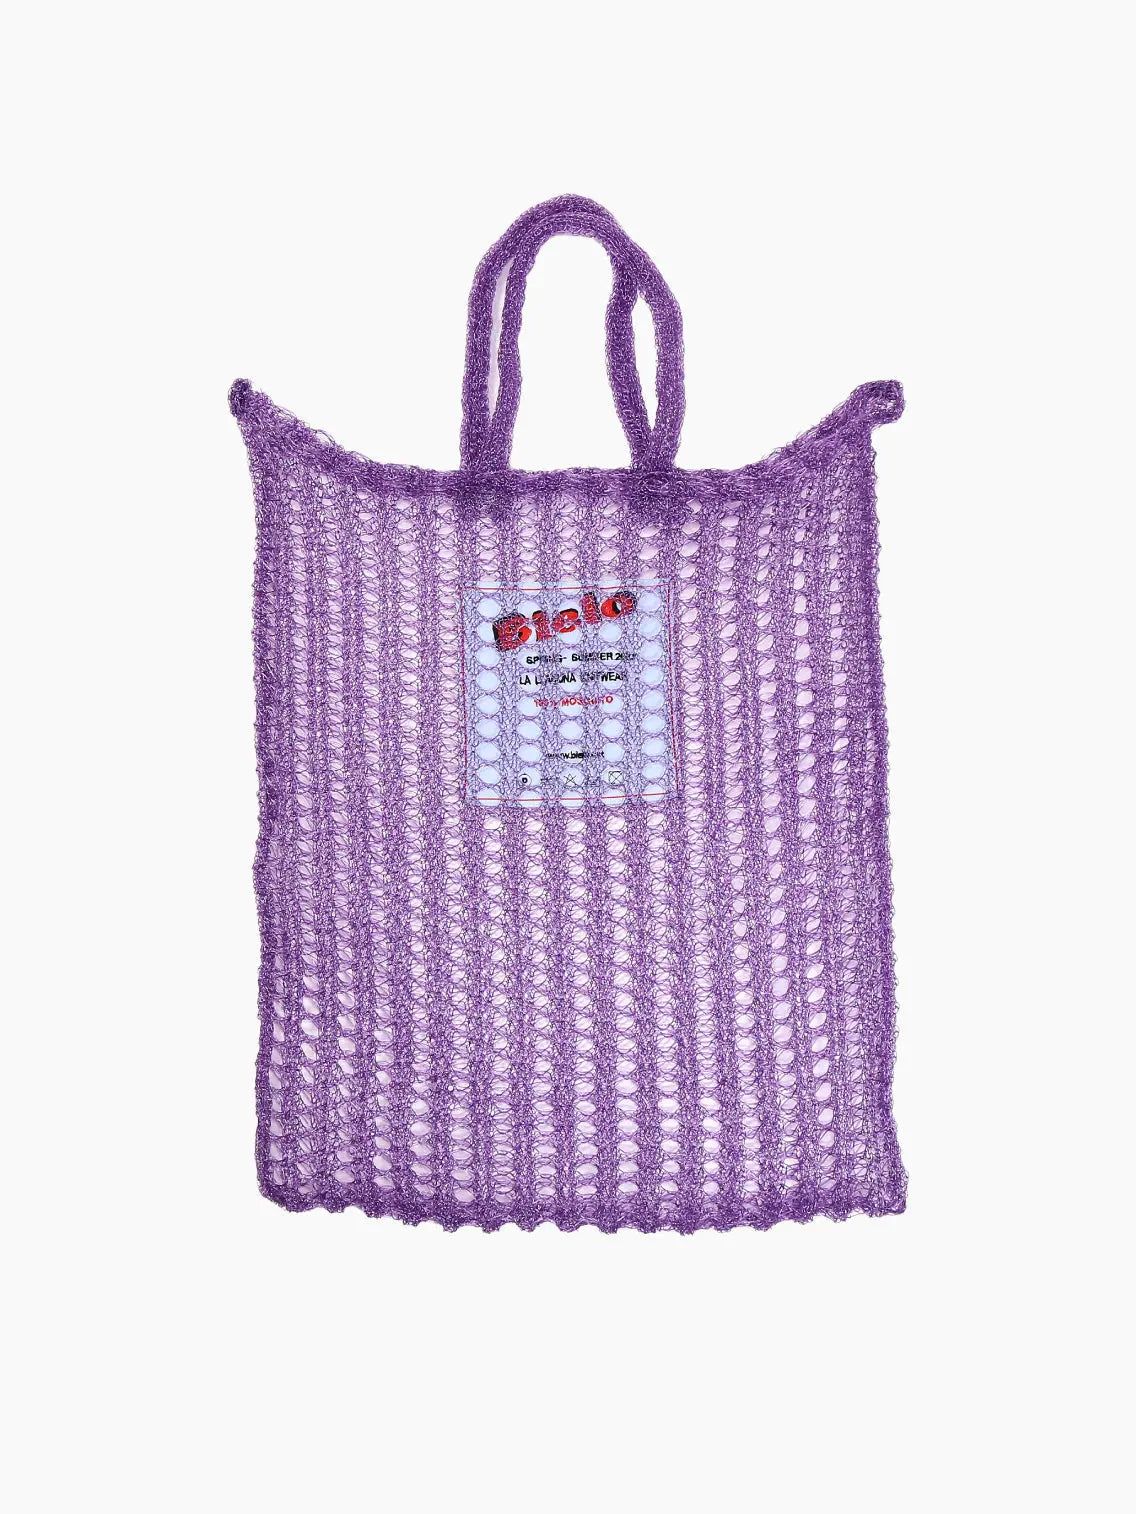 A purple, open-knit mesh market bag with two handles. The front features a white tag with red and black text, giving it a chic touch. This lightweight and stretchy bag is perfect for carrying groceries or other items—ideal for your next trip to the Barcelona store. Introducing the Bielo Mesh Tote Bag Lilac!